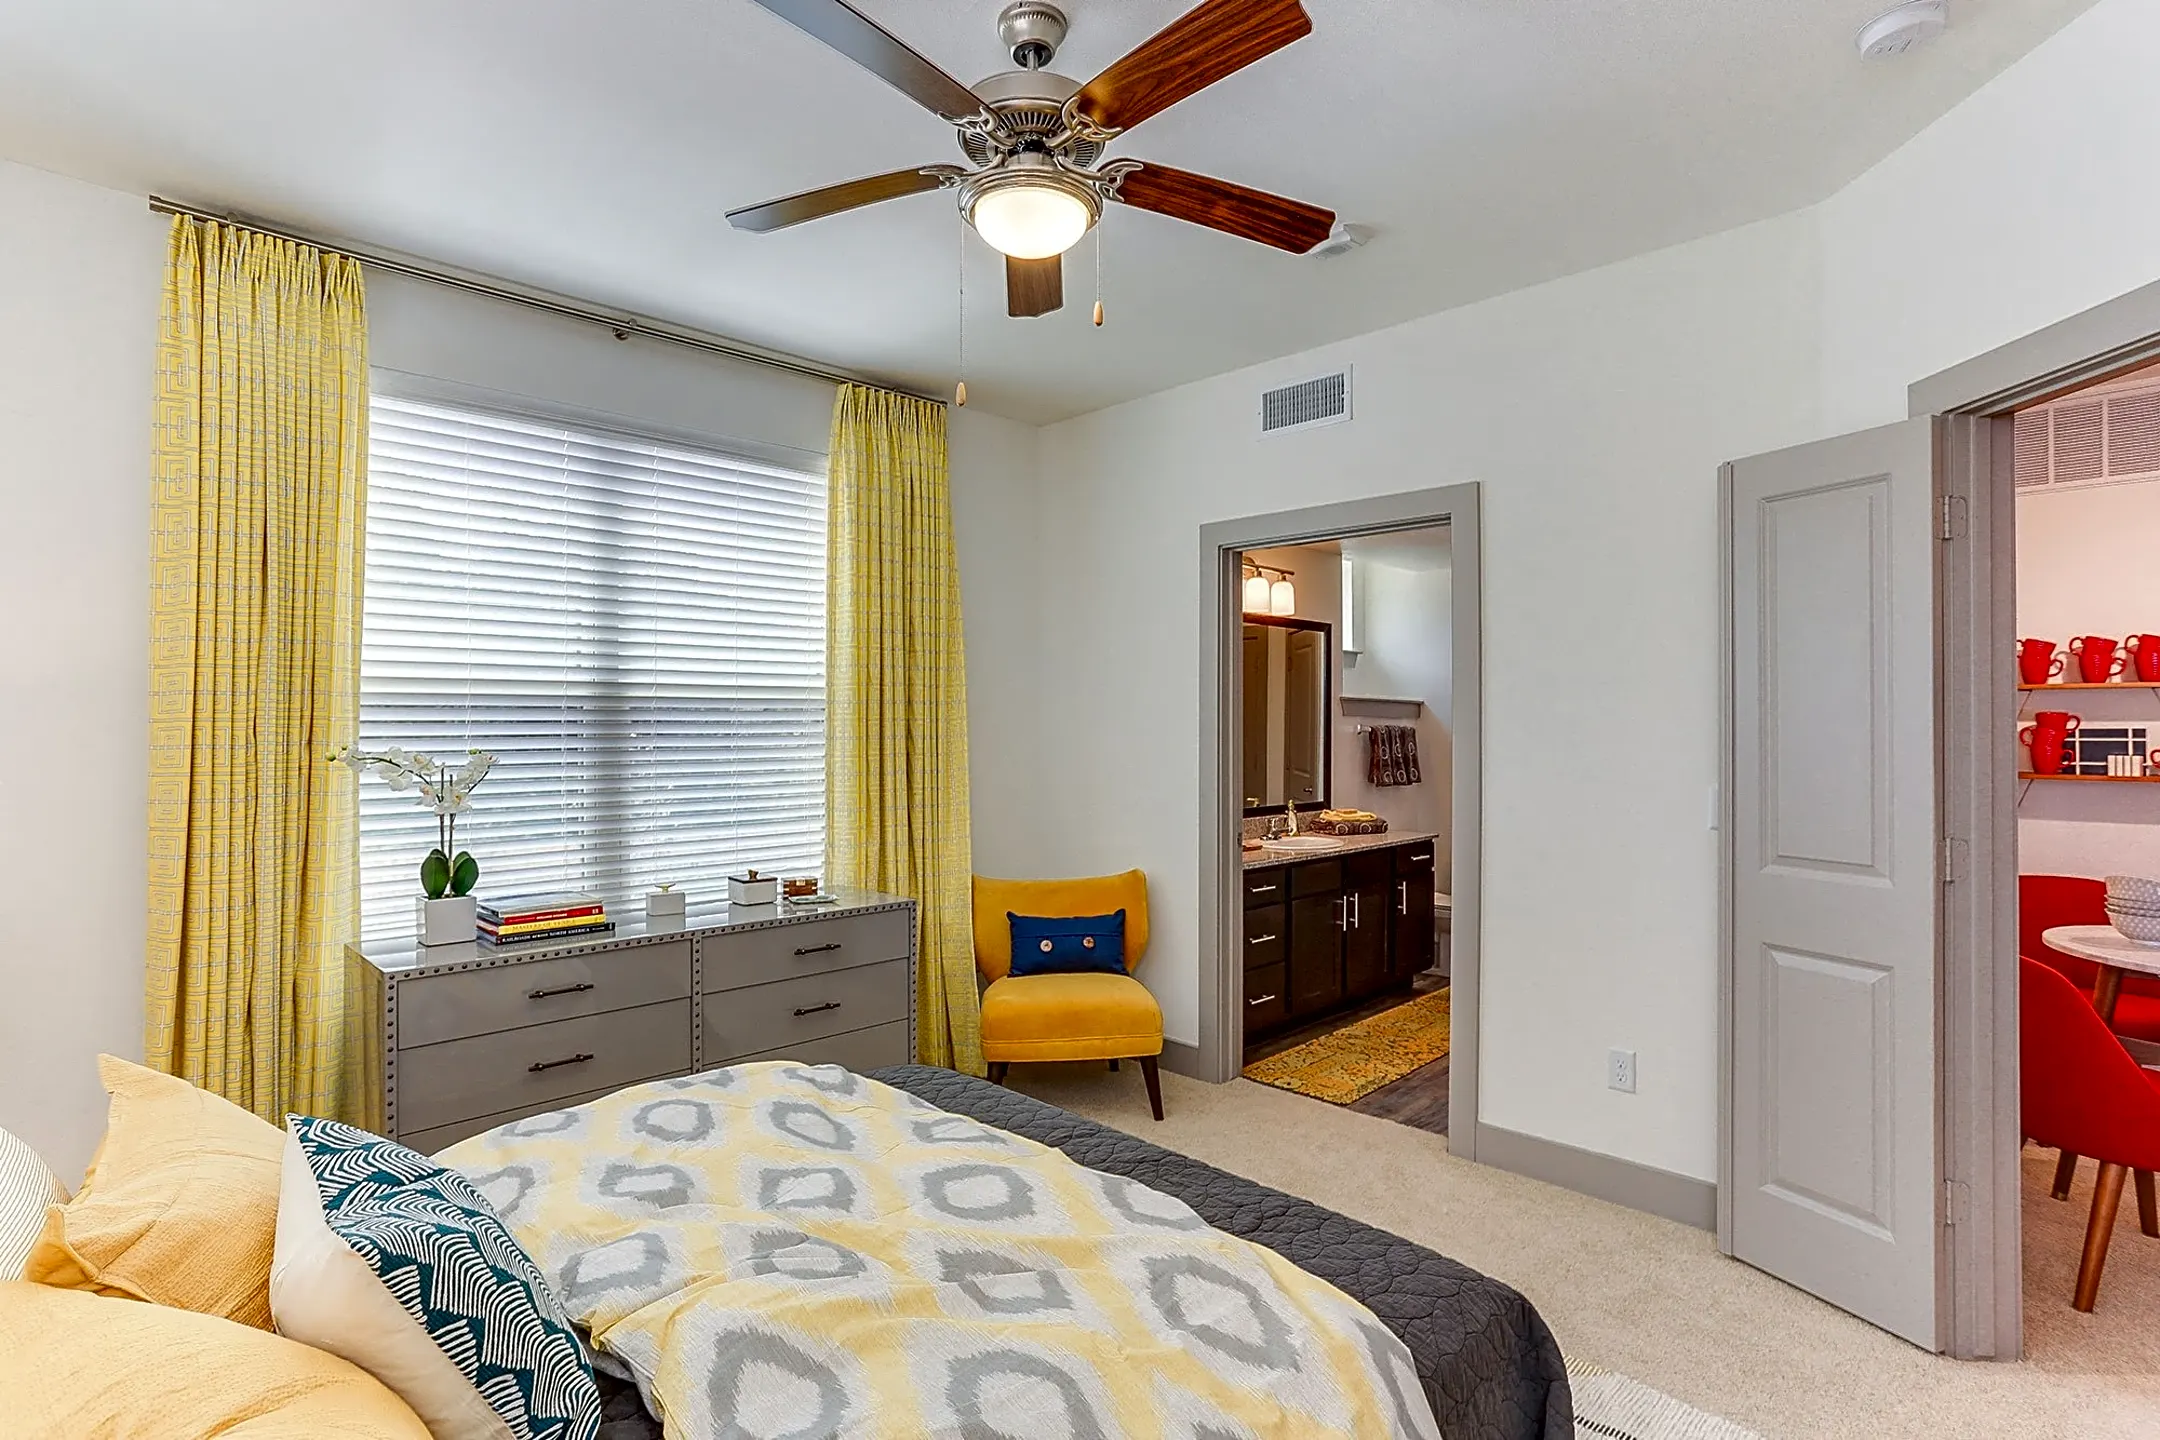 Bedroom - The Bend at Crescent Pointe - College Station, TX